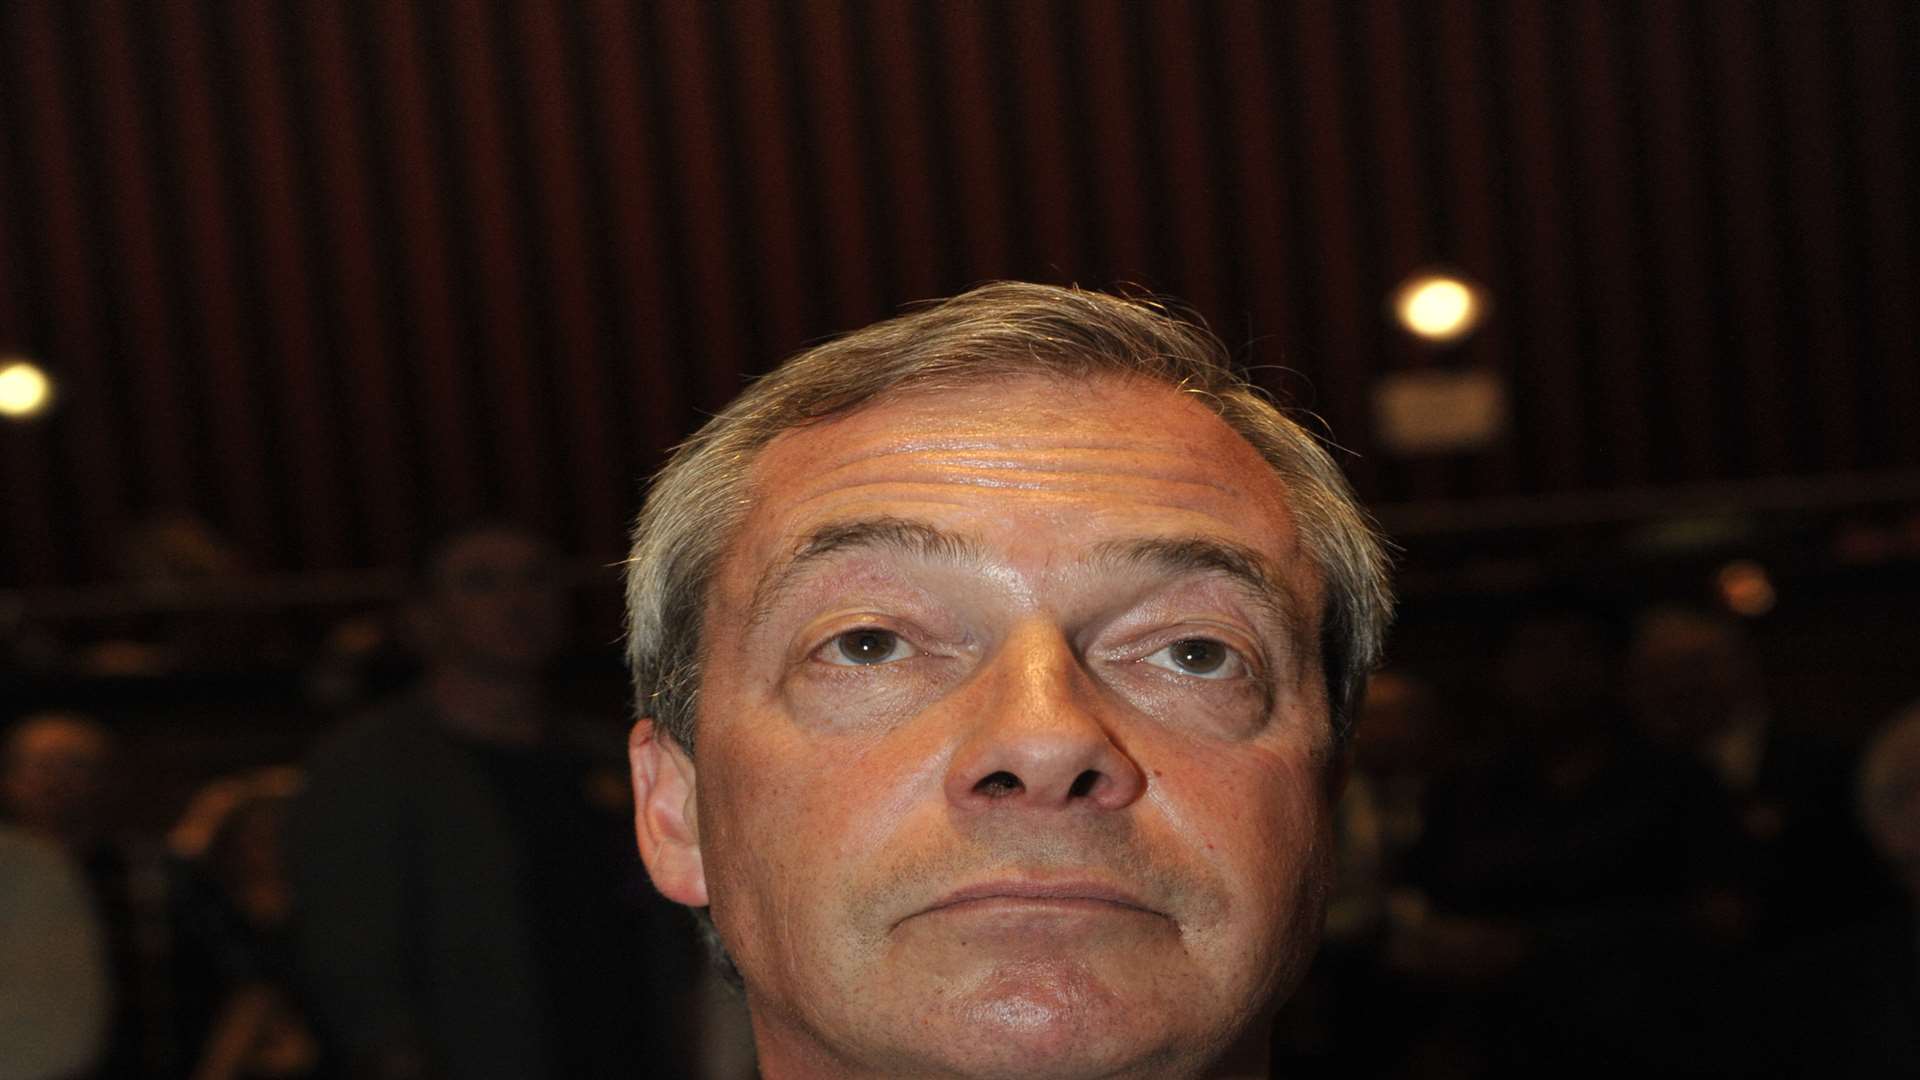 Ukip leader Nigel Farage is to stand down